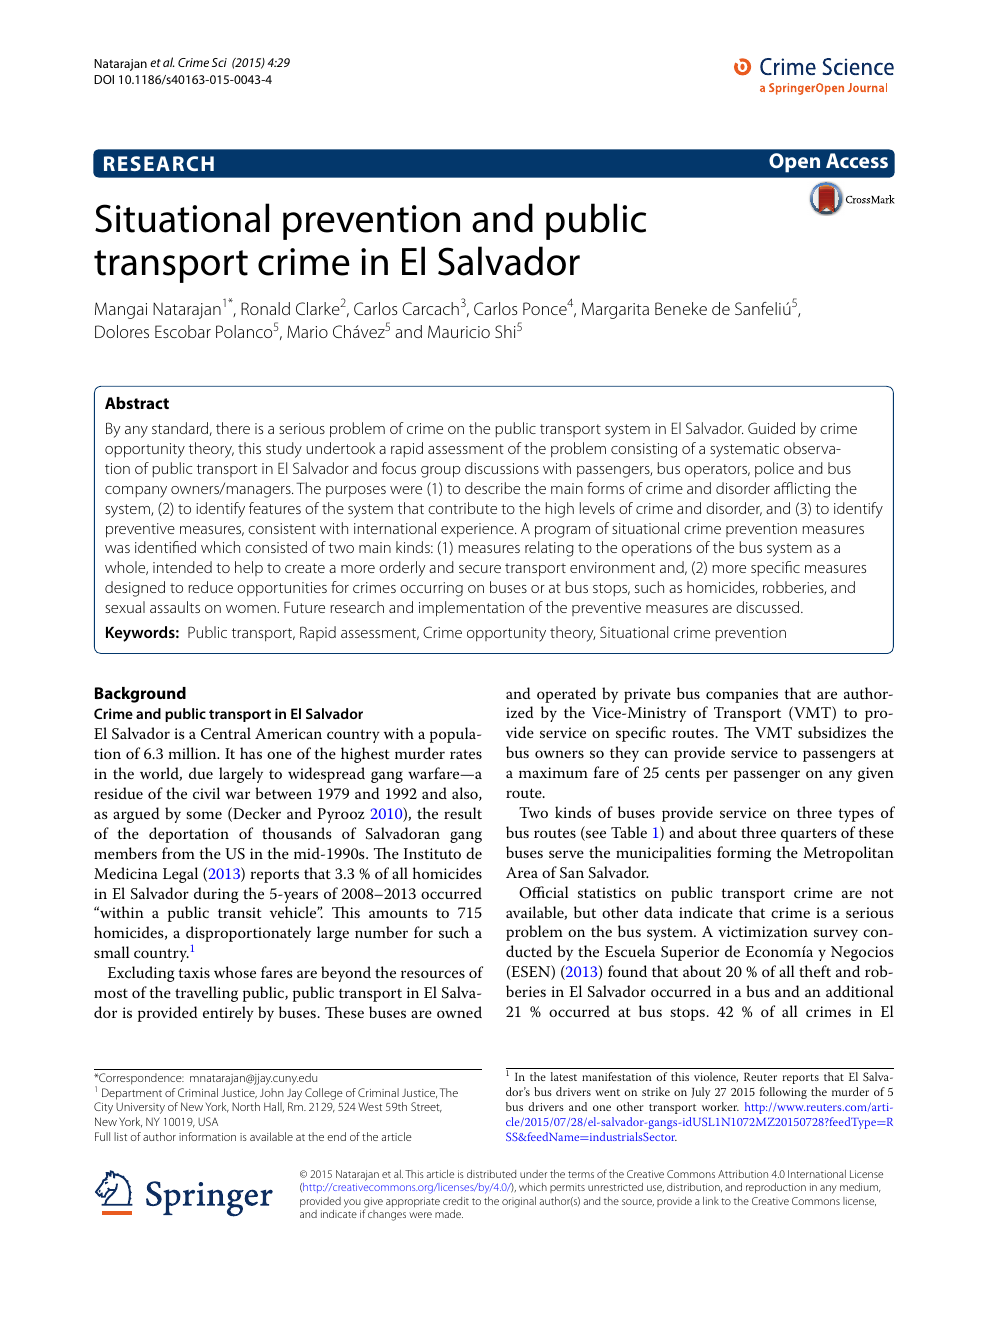 Situational Prevention And Public Transport Crime In El Salvador Topic Of Research Paper In Economics And Business Download Scholarly Article Pdf And Read For Free On Cyberleninka Open Science Hub